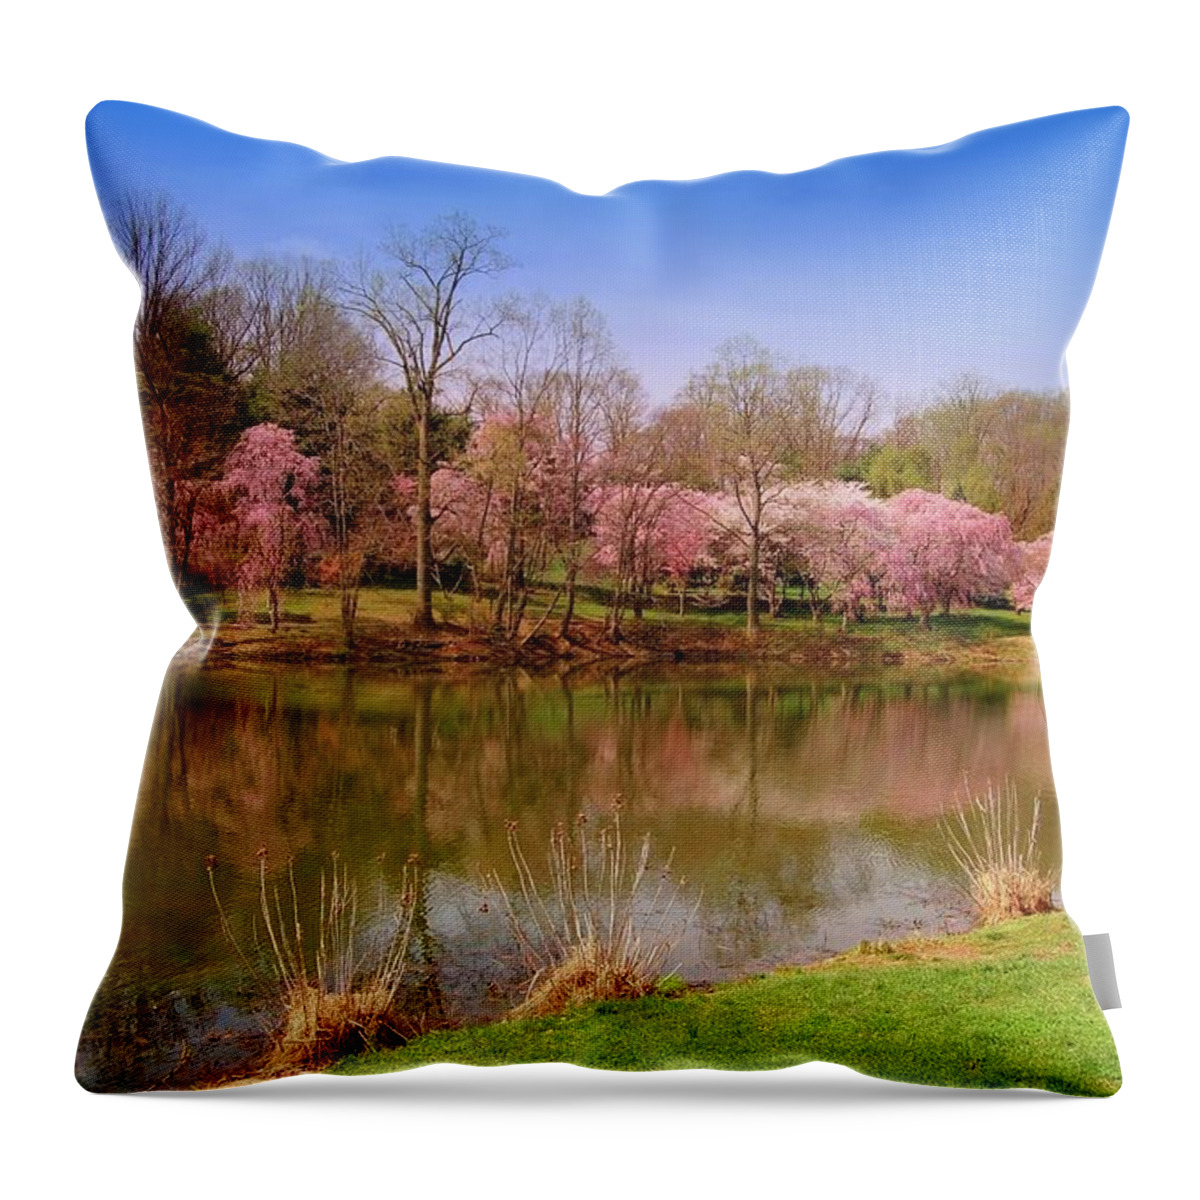 Cherry Blossoms Throw Pillow featuring the photograph Holmdel Park In Spring by Angie Tirado